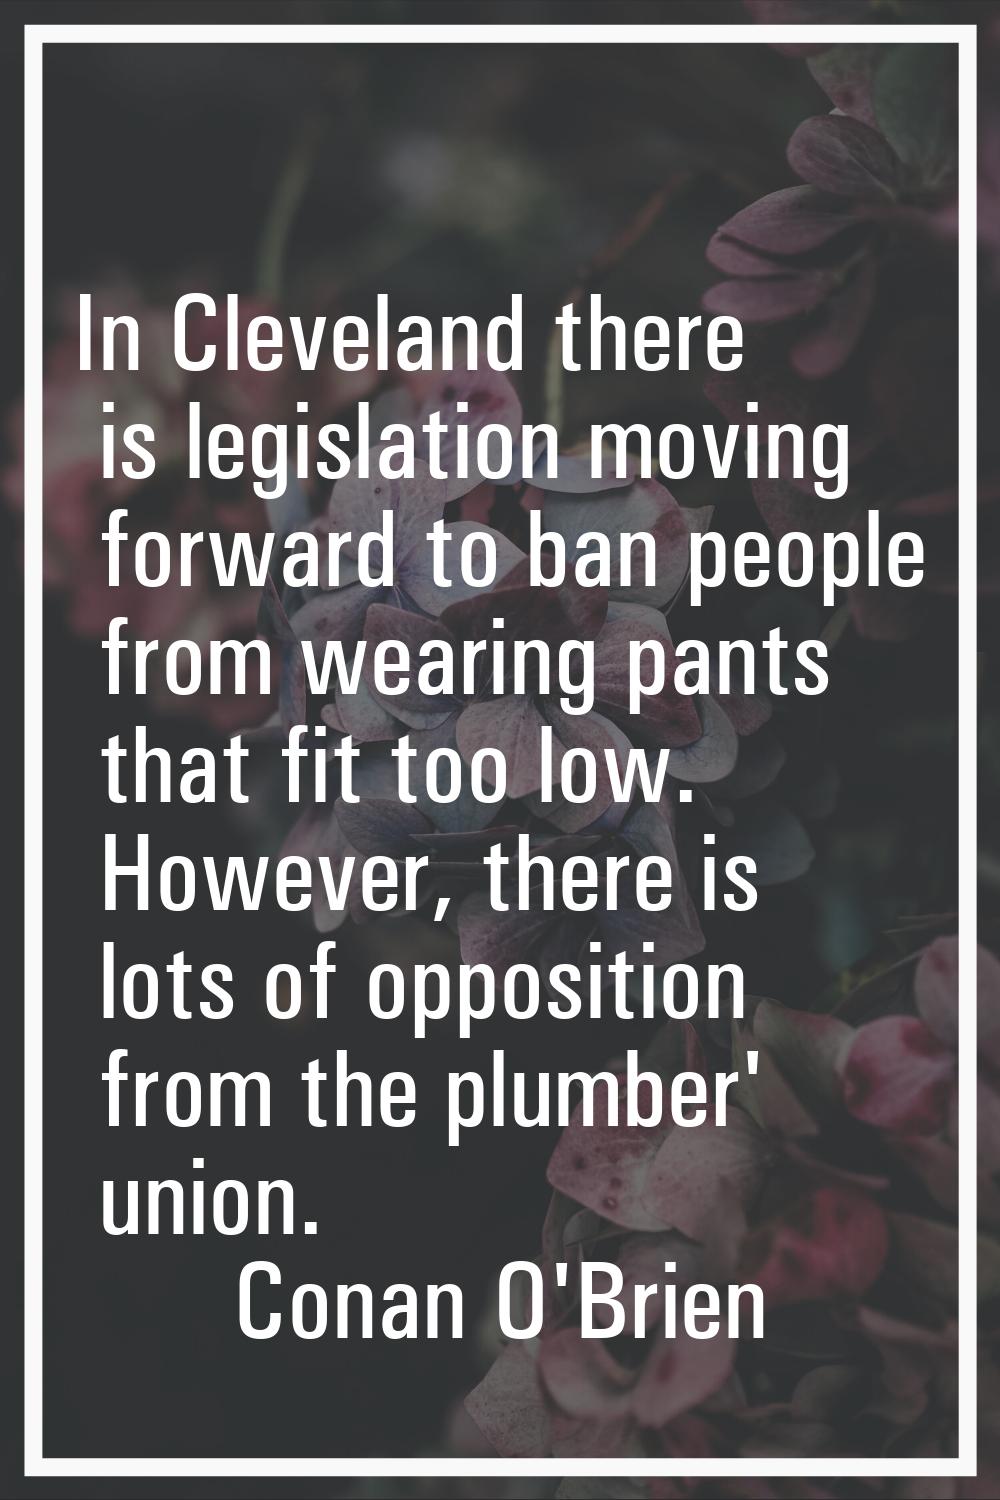 In Cleveland there is legislation moving forward to ban people from wearing pants that fit too low.